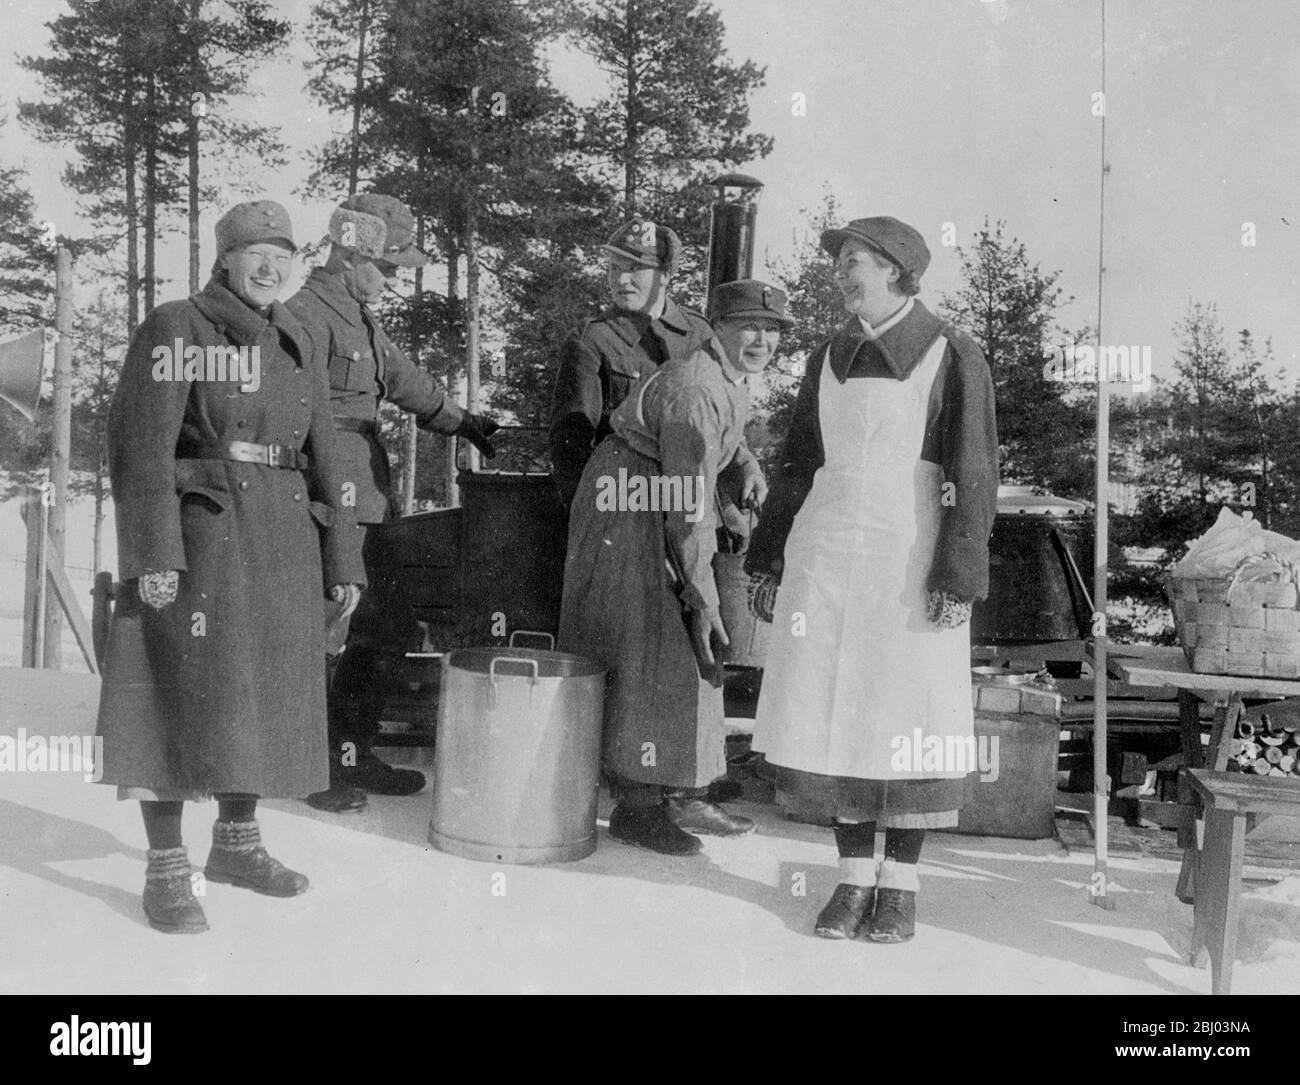 Women 'soldiers' of Finland. - They cook at a Field Kitchen!. - Military uniformed members of 'Lottas', the Finnish women's patriotic organisation, use a field kitchen to fulfil the feminine duty or preparing food for competitors in the world skiing Championships at Lahti, Finland. - One of the women is wearing an apron over her greatcoat. - 26 February 26 1938 Stock Photo